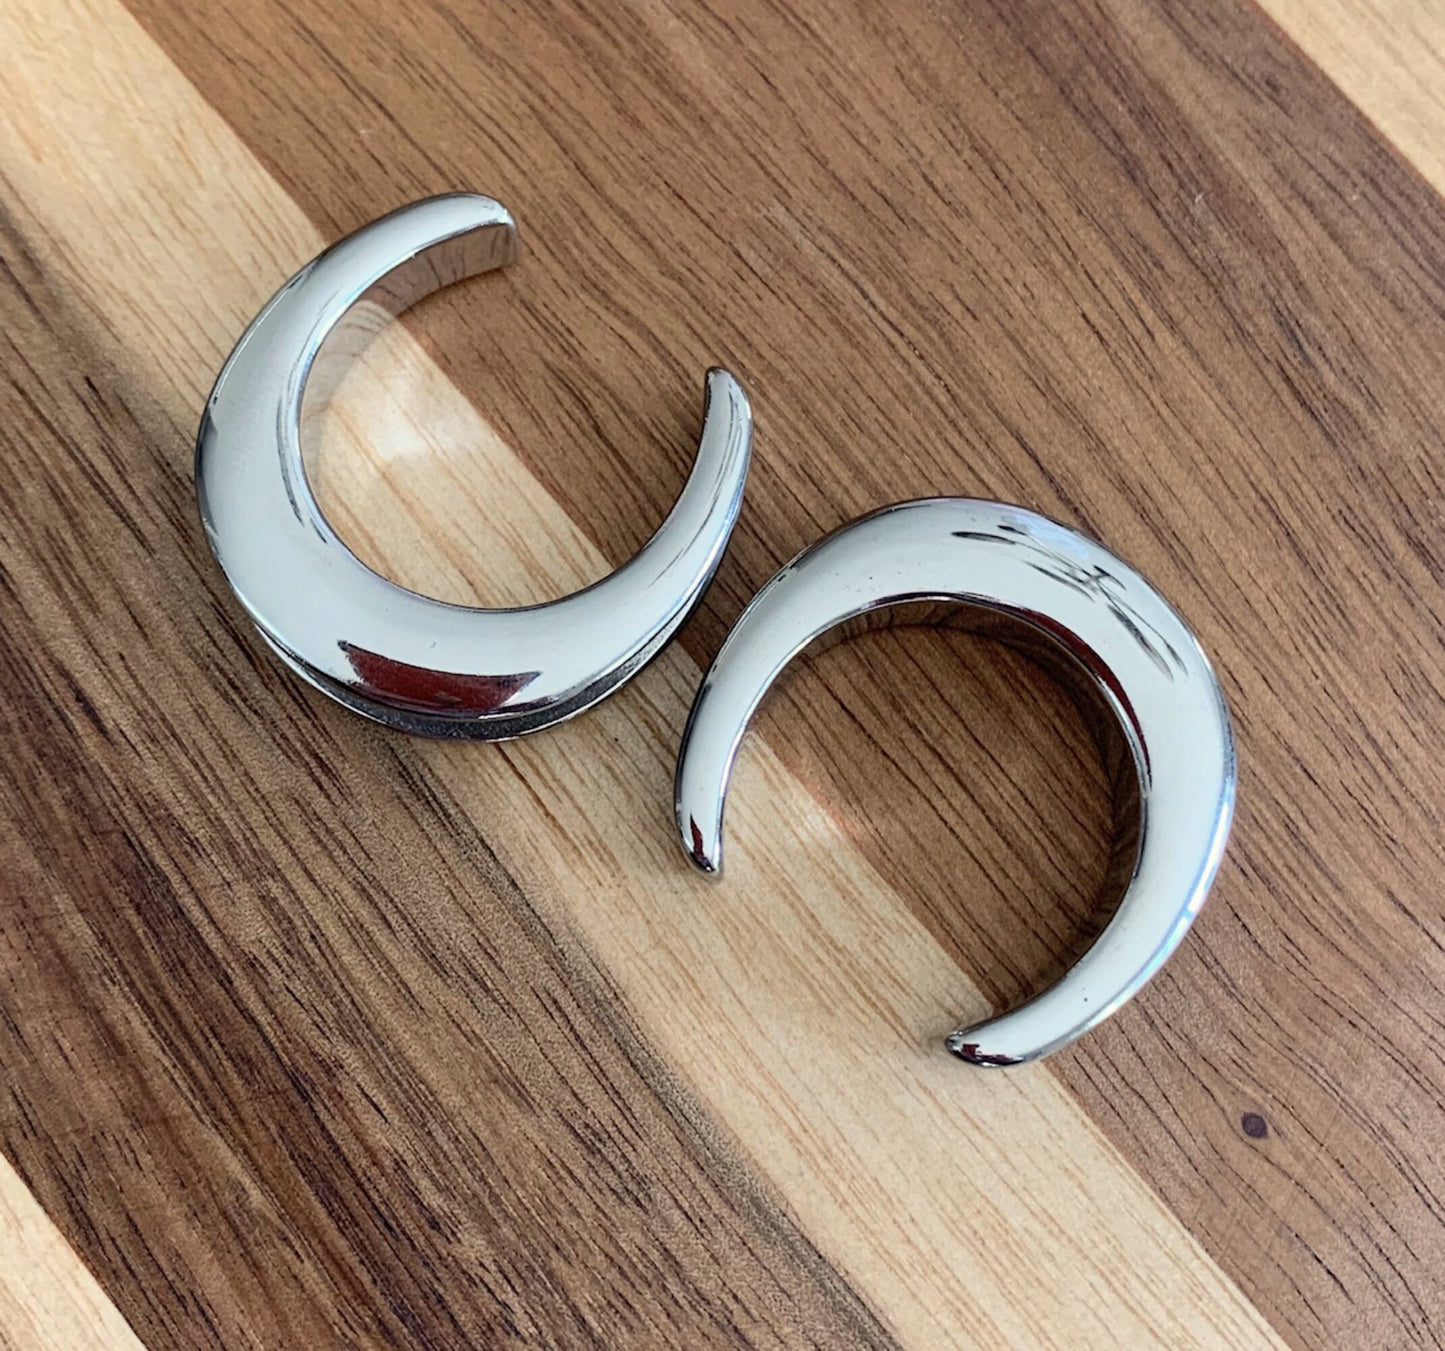 PAIR of Unique Saddle Surgical Steel Ear Spreaders Silver Hanger-Tunnels/Plugs - Gauges 00g (10mm) thru 1" (25mm) available!